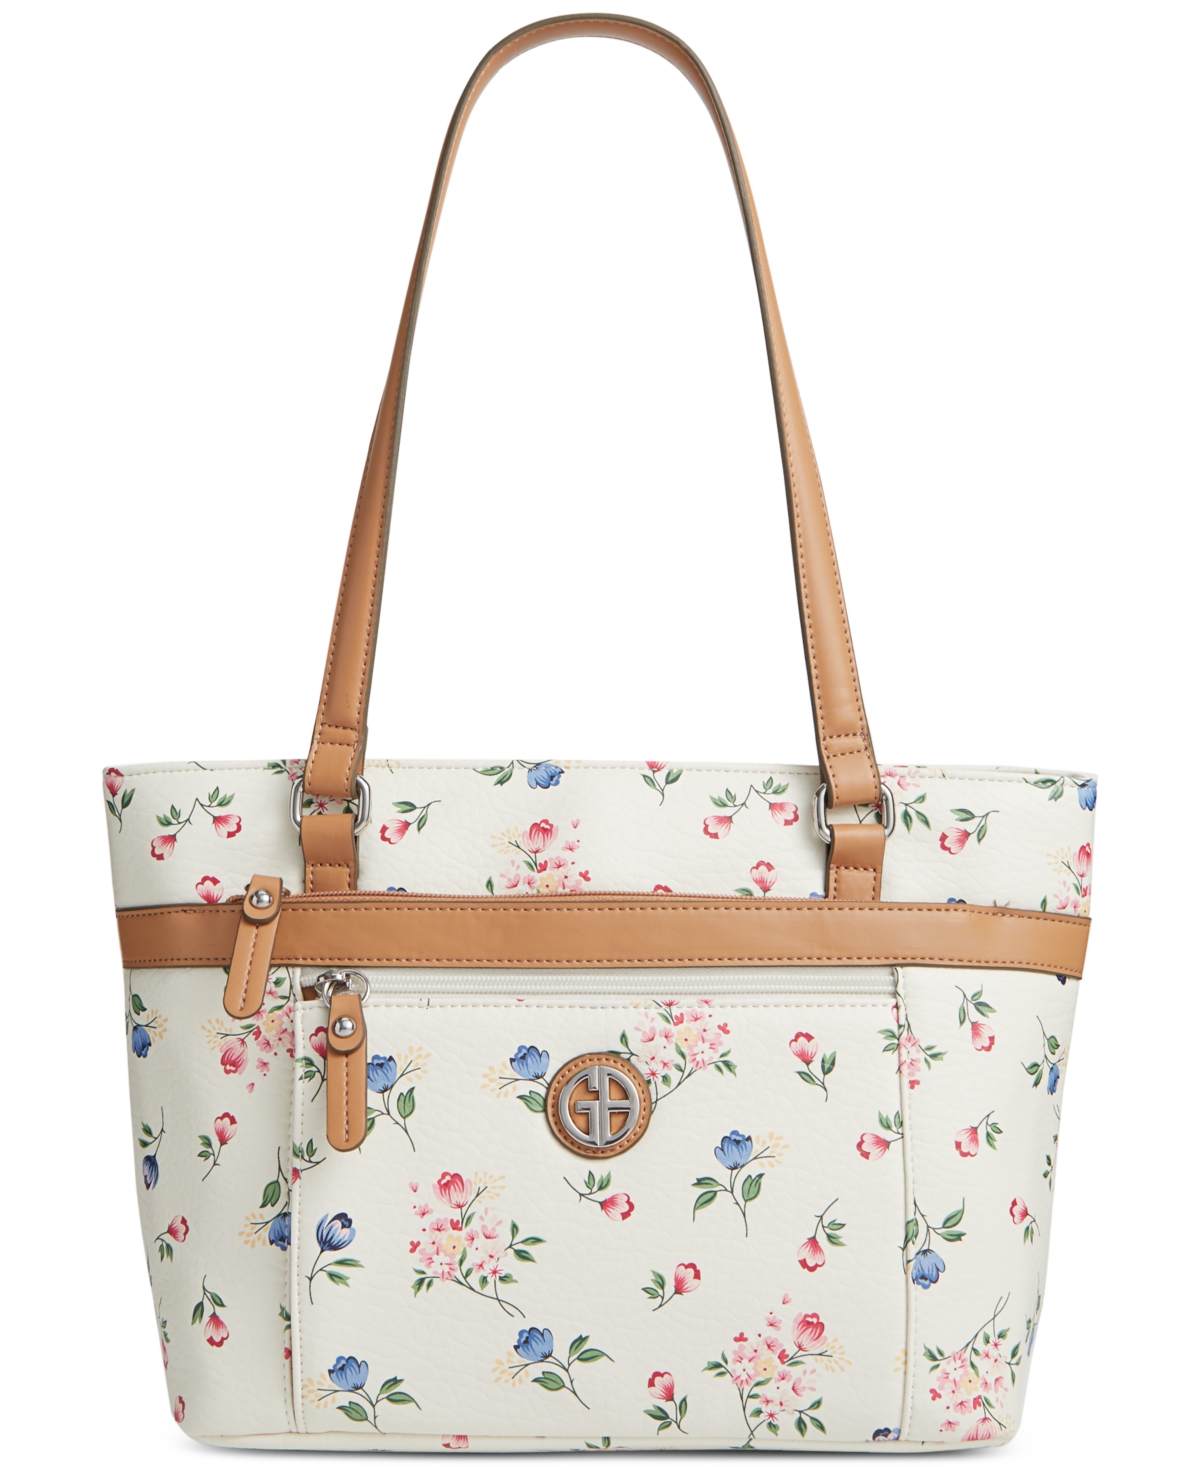 Pebble Floral Tote, Created for Macy's - Floral Print